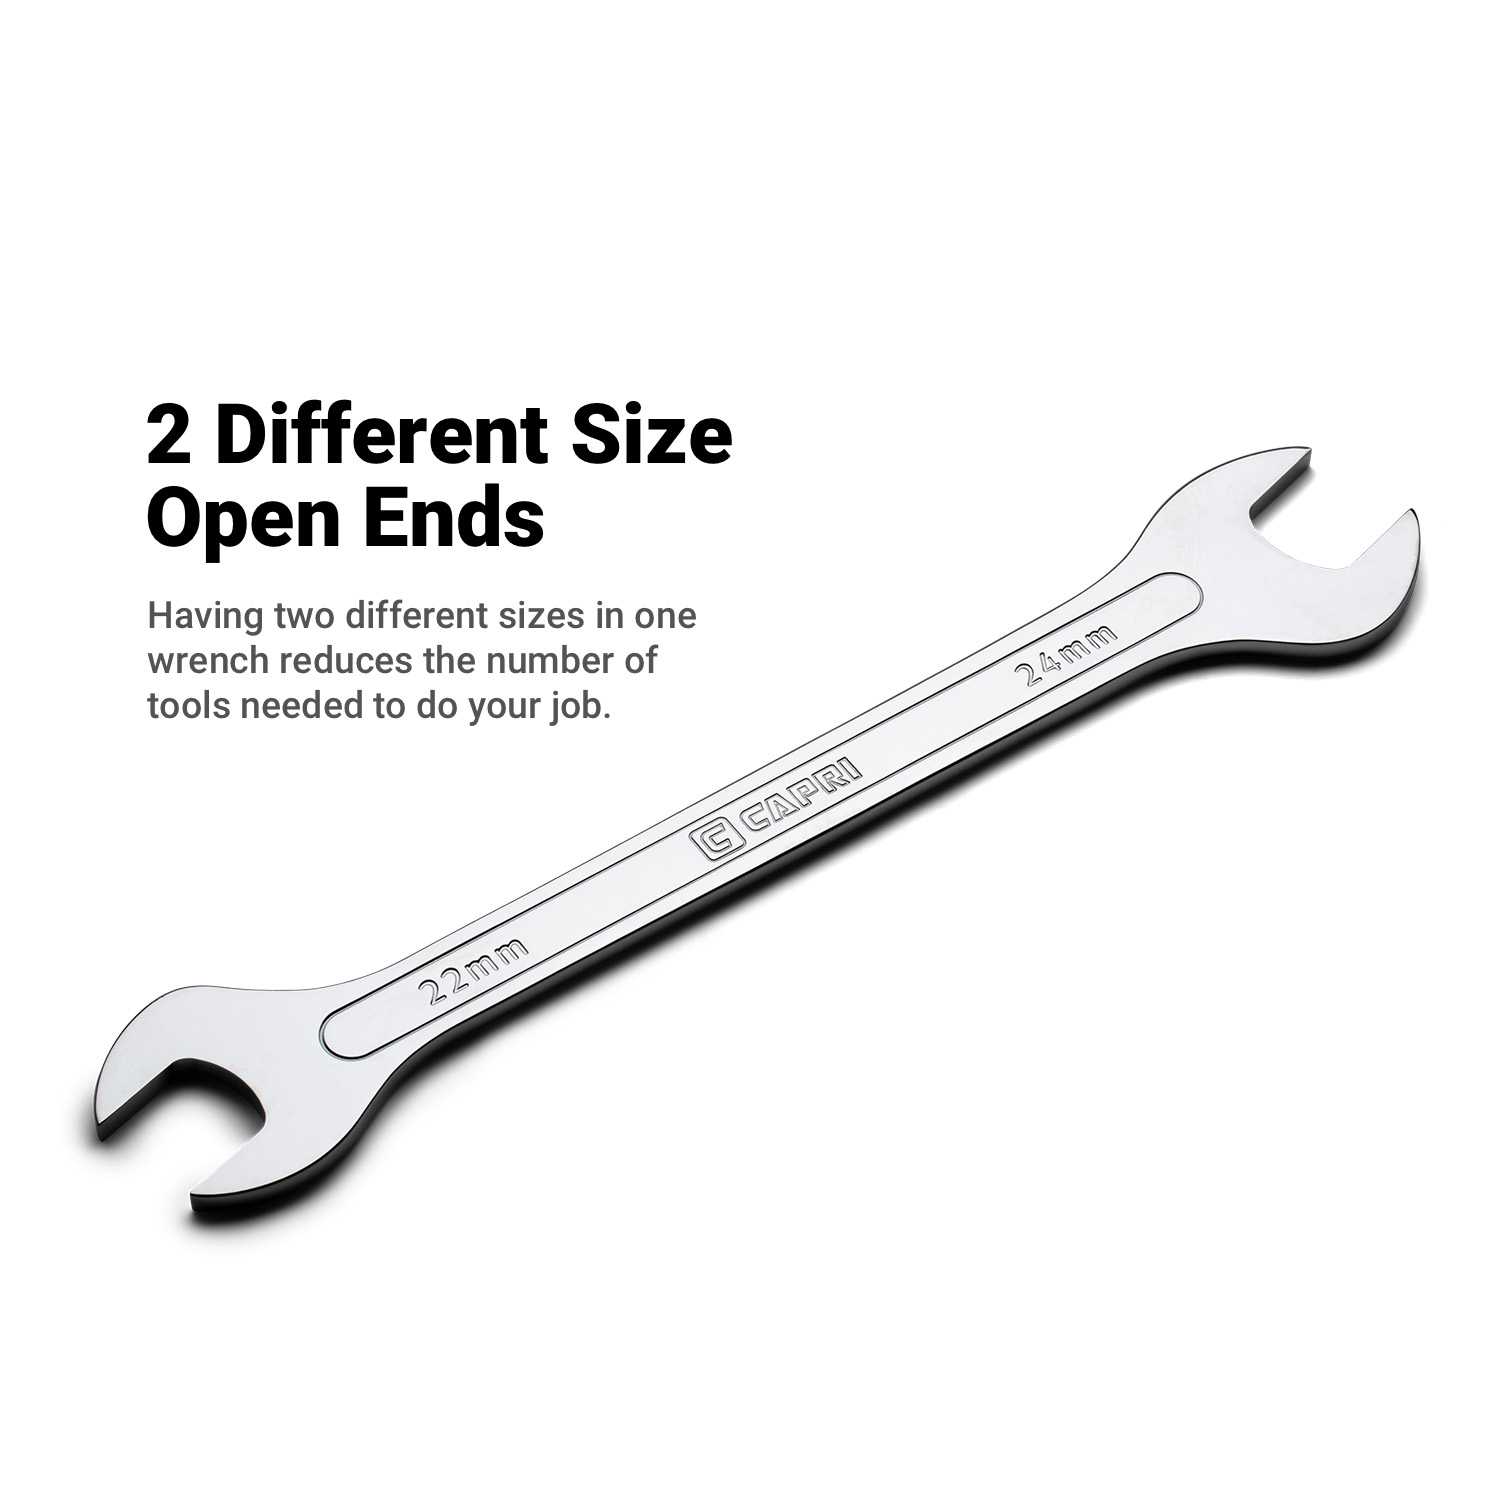 Capri Tools 1-3/16 in. x 1-1/4 in. Super-Thin Open End Wrench, SAE